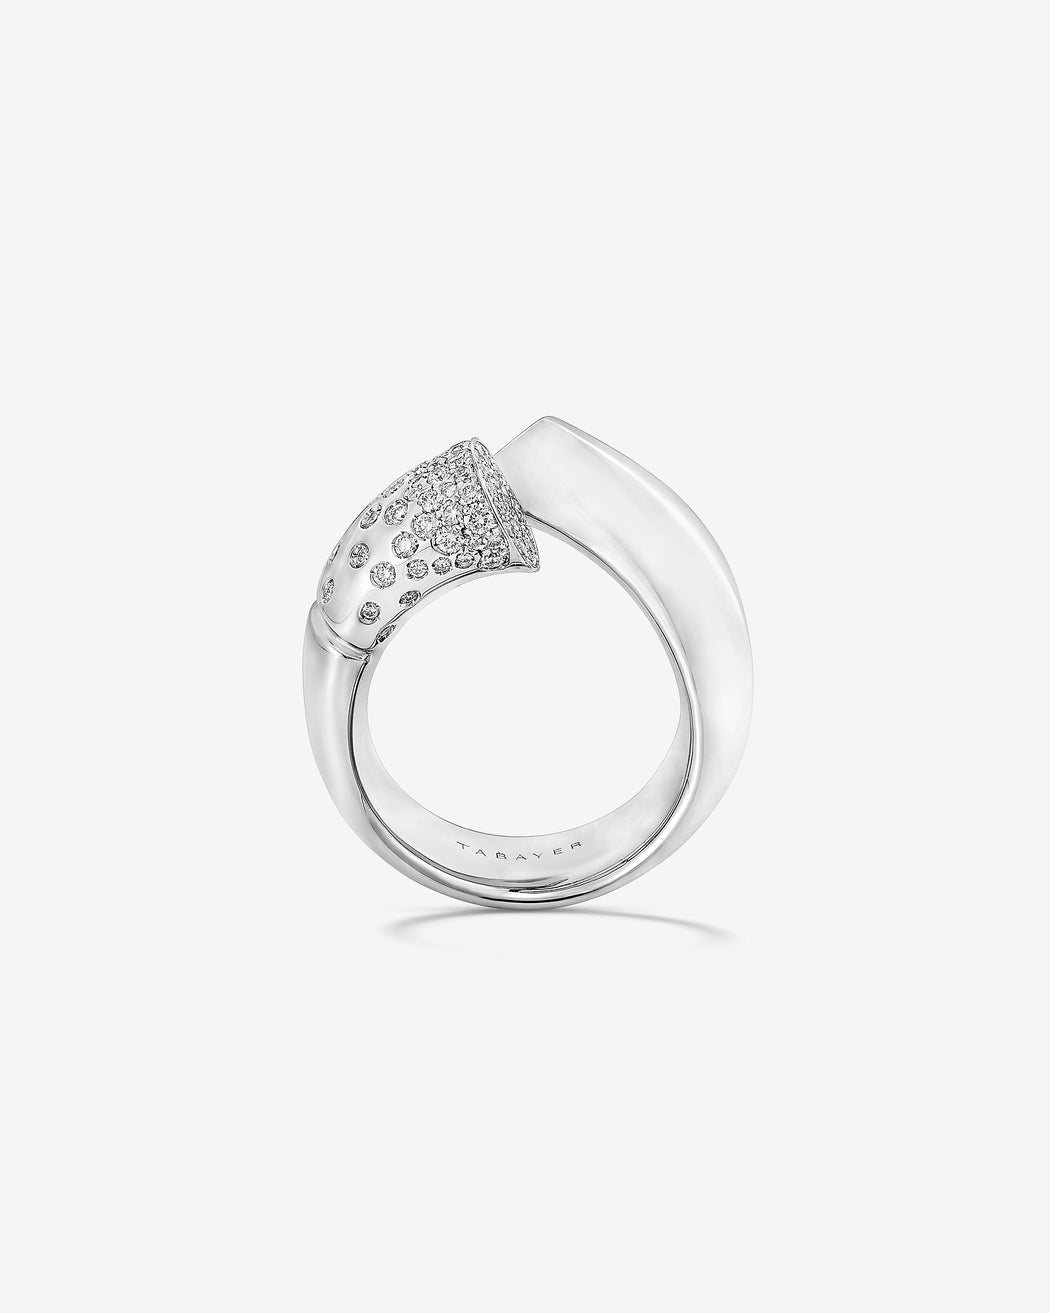 Oera ring 18k Fairmined white gold and diamonds, Tabayer ethical fine jewelry